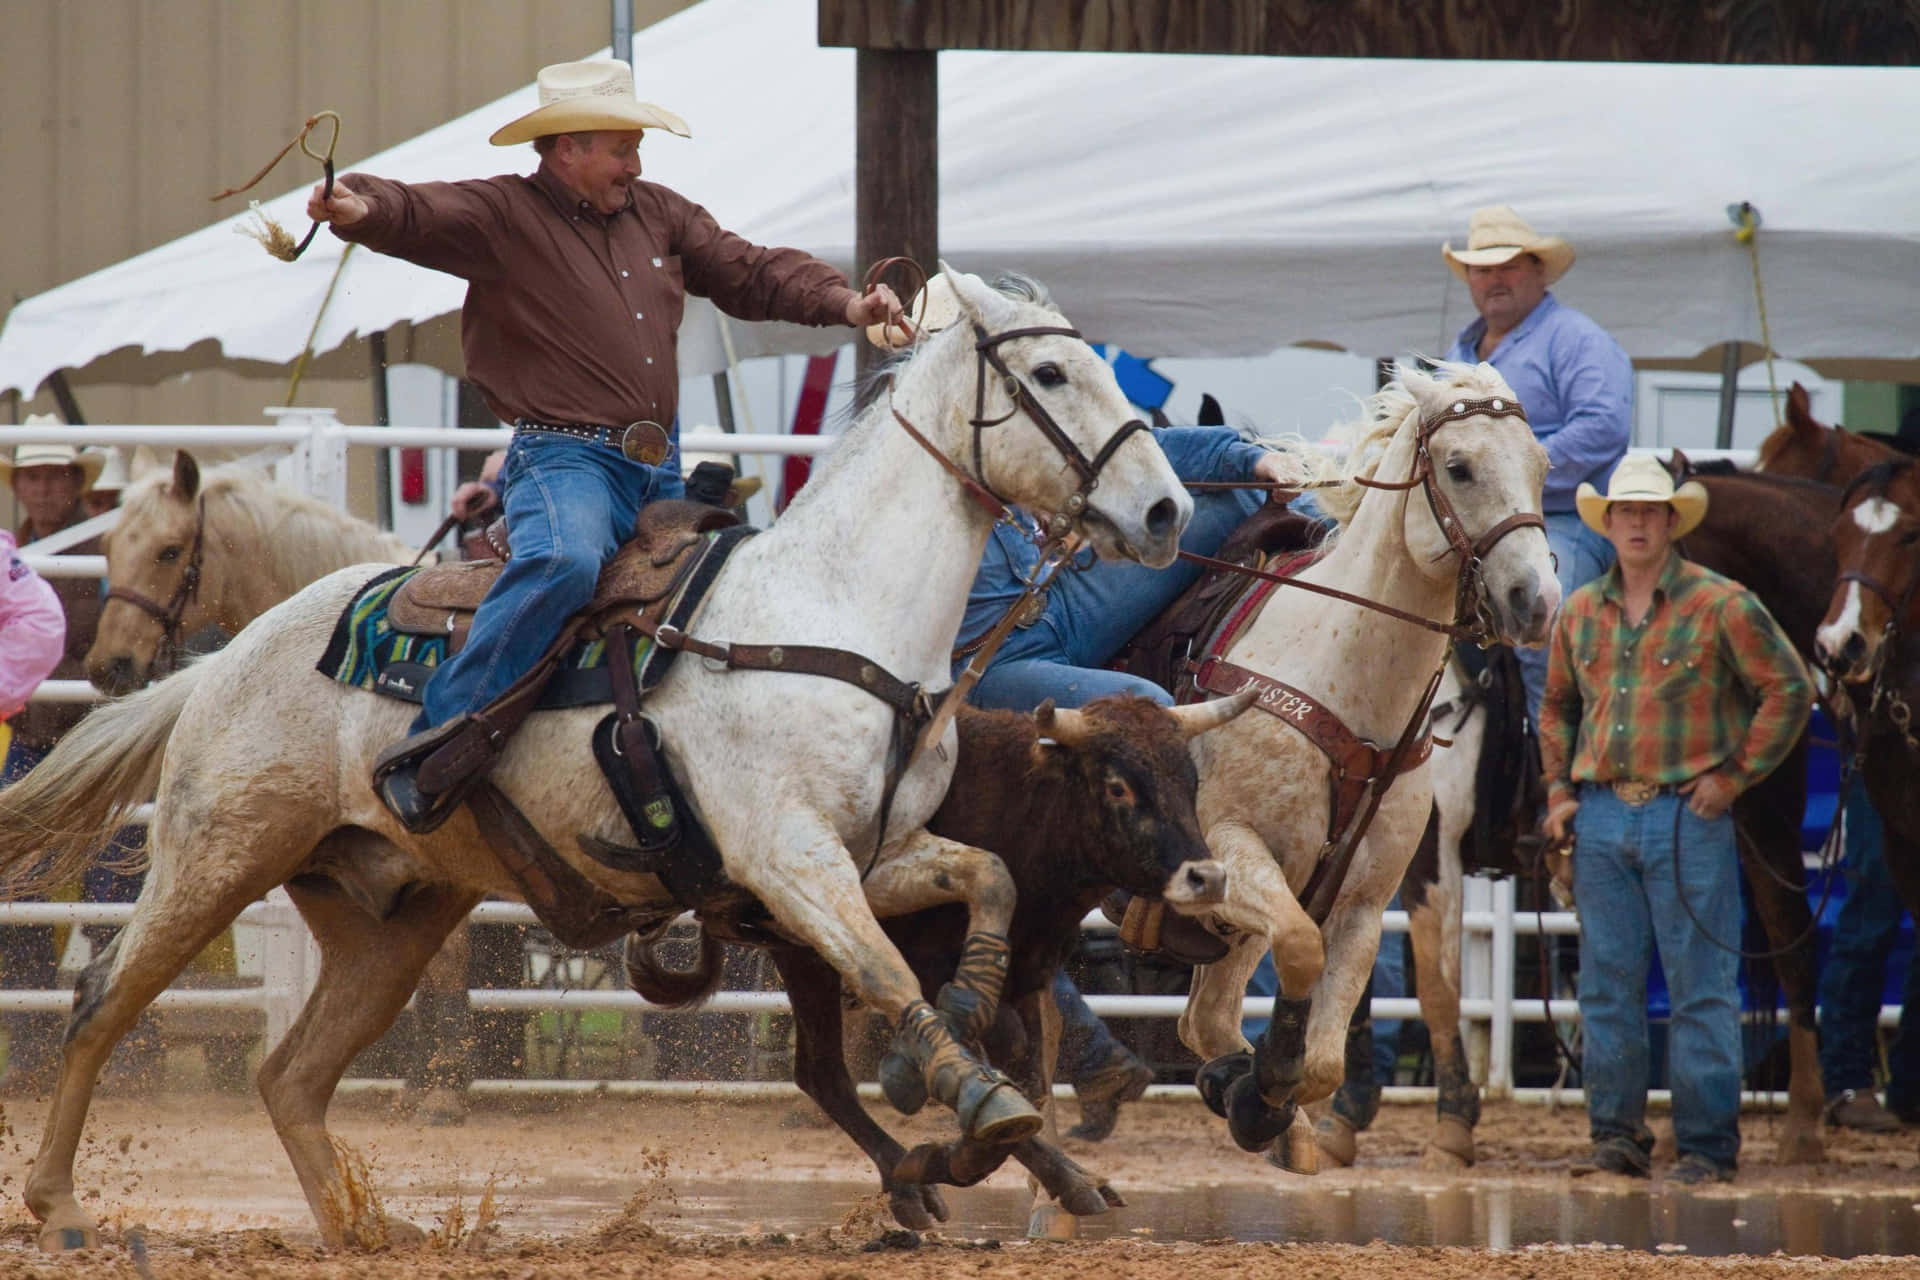 Get Ready To Ride - Rodeo Cowboys Showcase Their Riding Skills Wallpaper